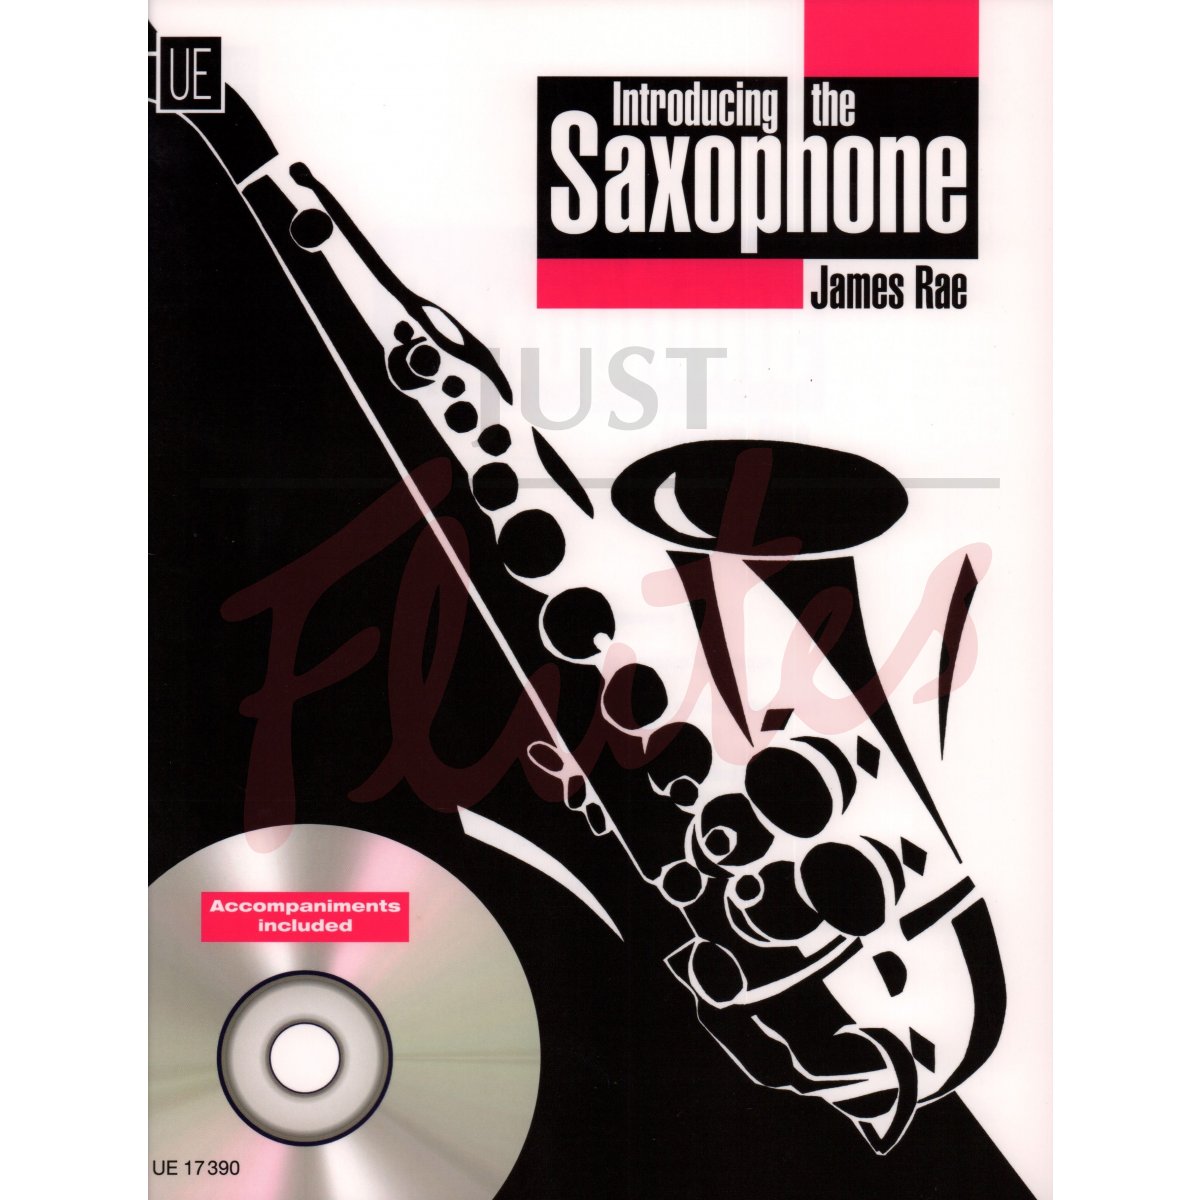 Introducing the Saxophone